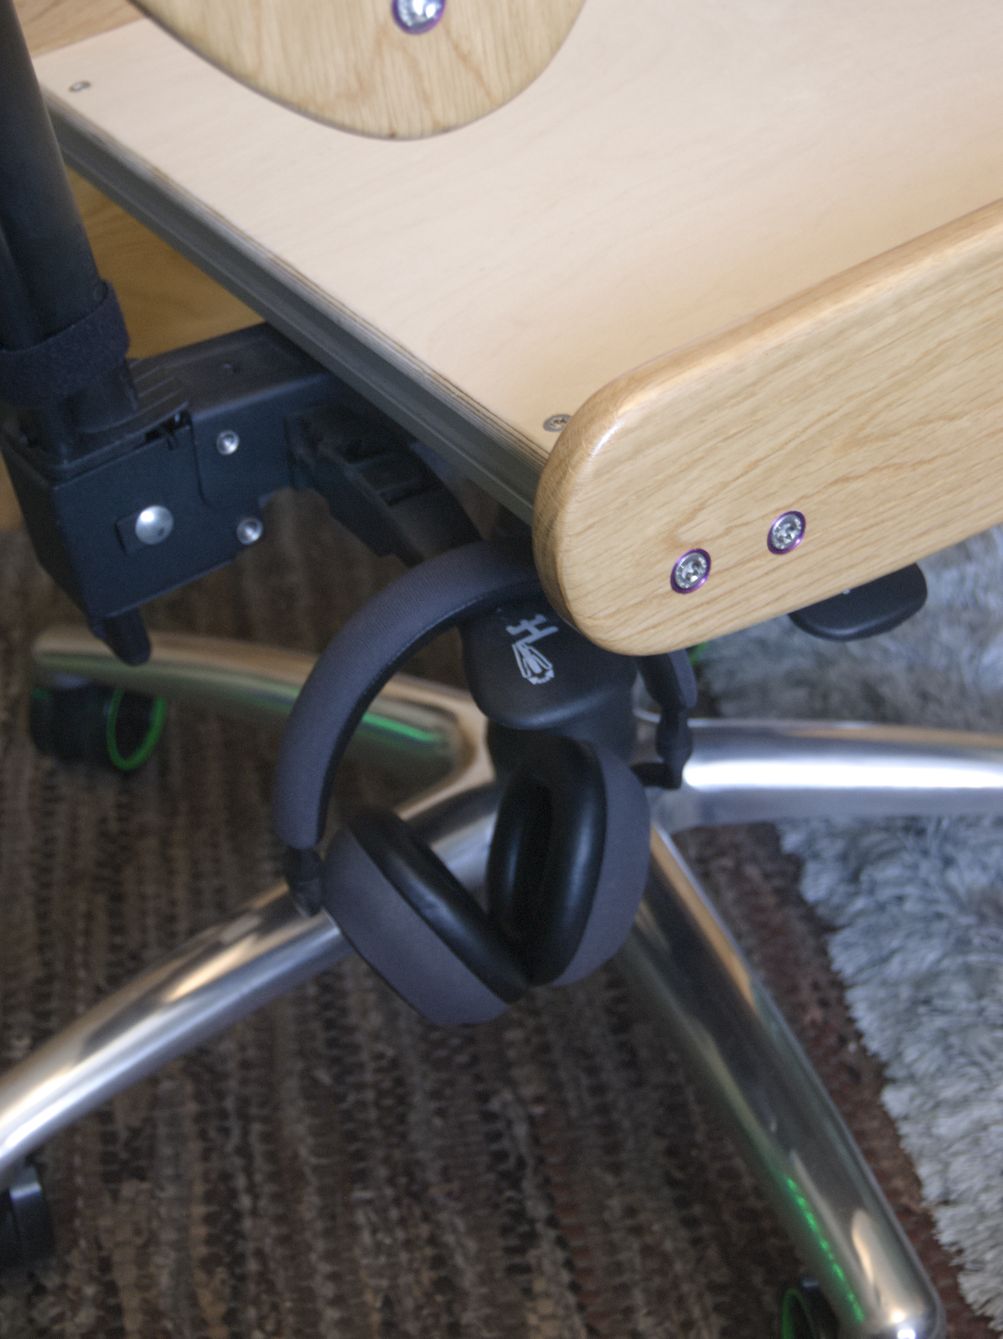 Closeup of the chair mechanism. Two levers protrude from the side, used to control the height, and the back tilting. One of the levers has a pair of headphones dangling from it.